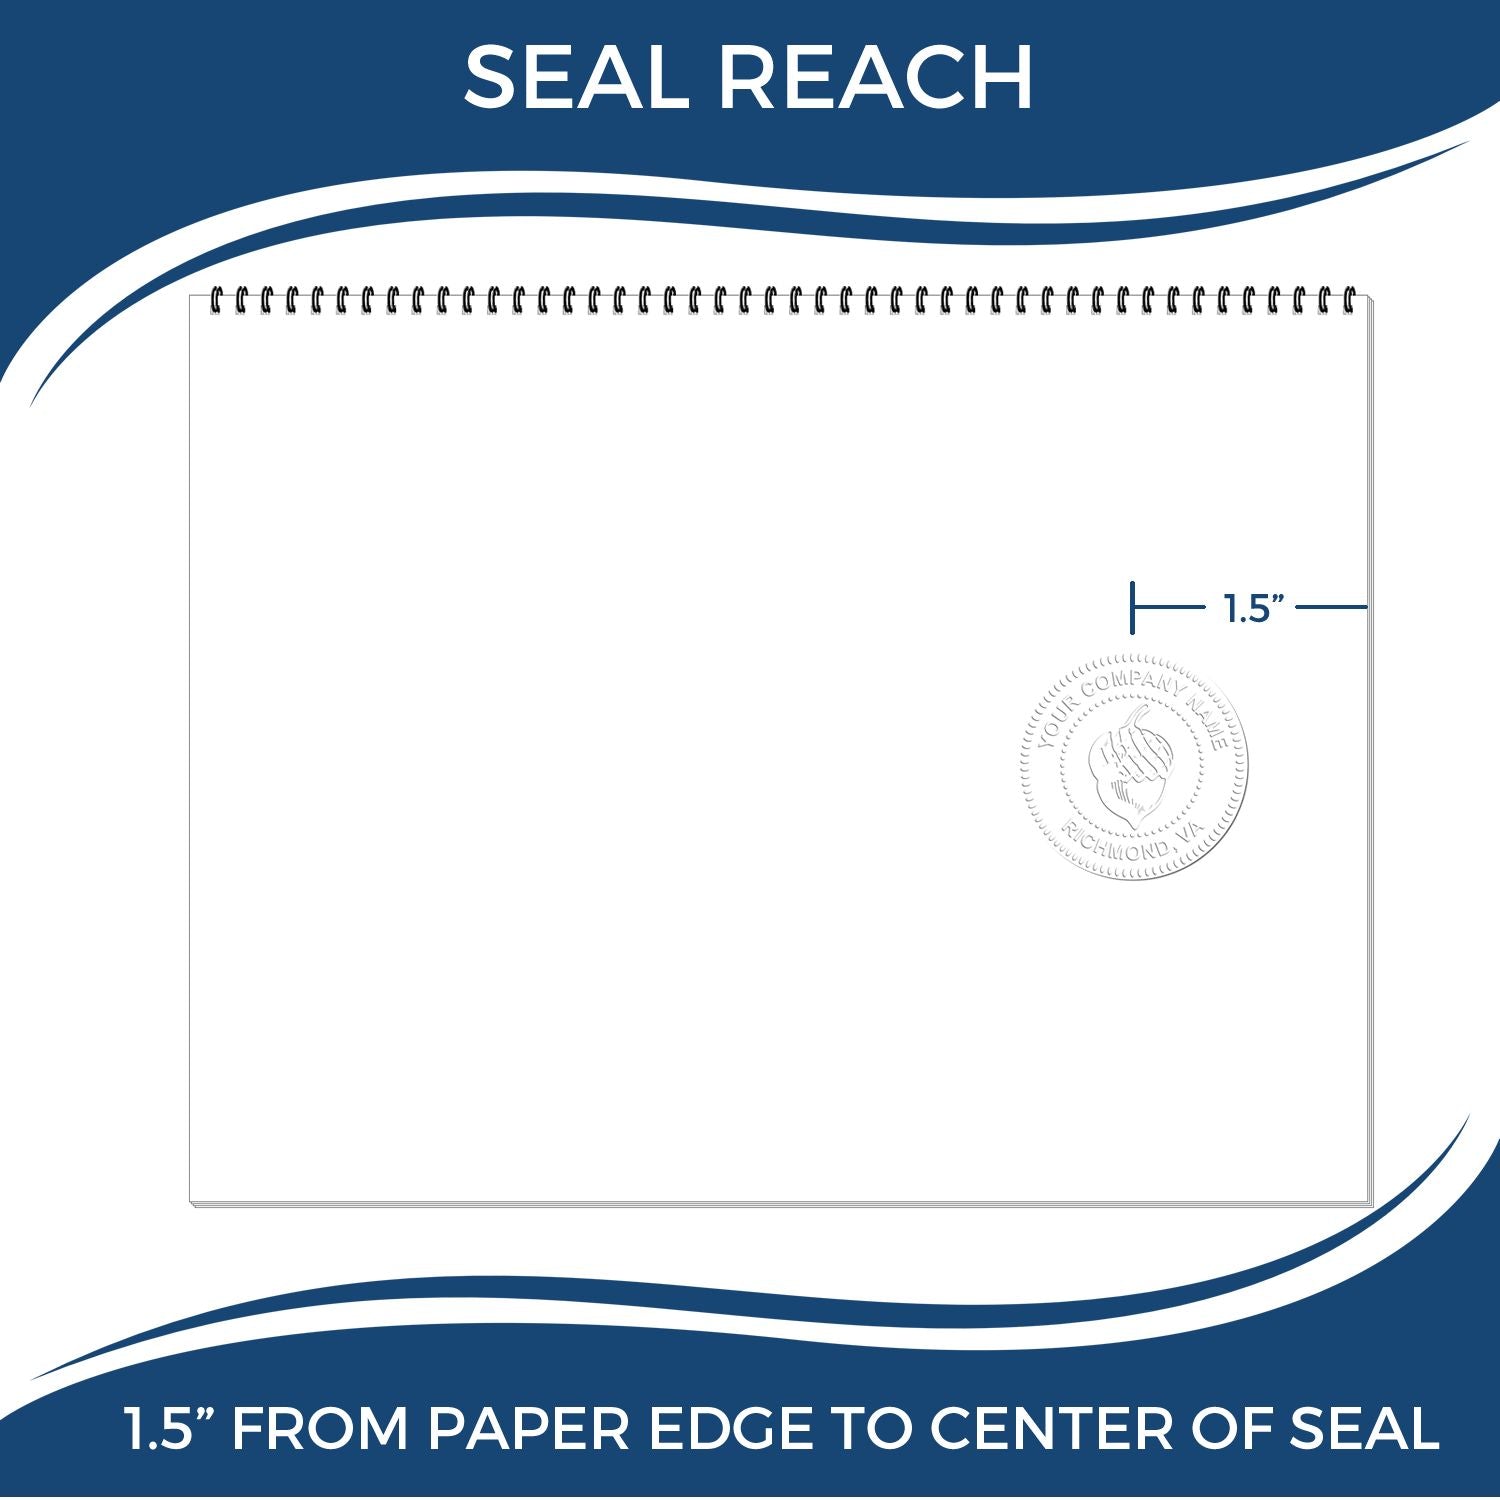 An infographic showing the seal reach which is represented by a ruler and a miniature seal image of the Handheld Oklahoma Land Surveyor Seal